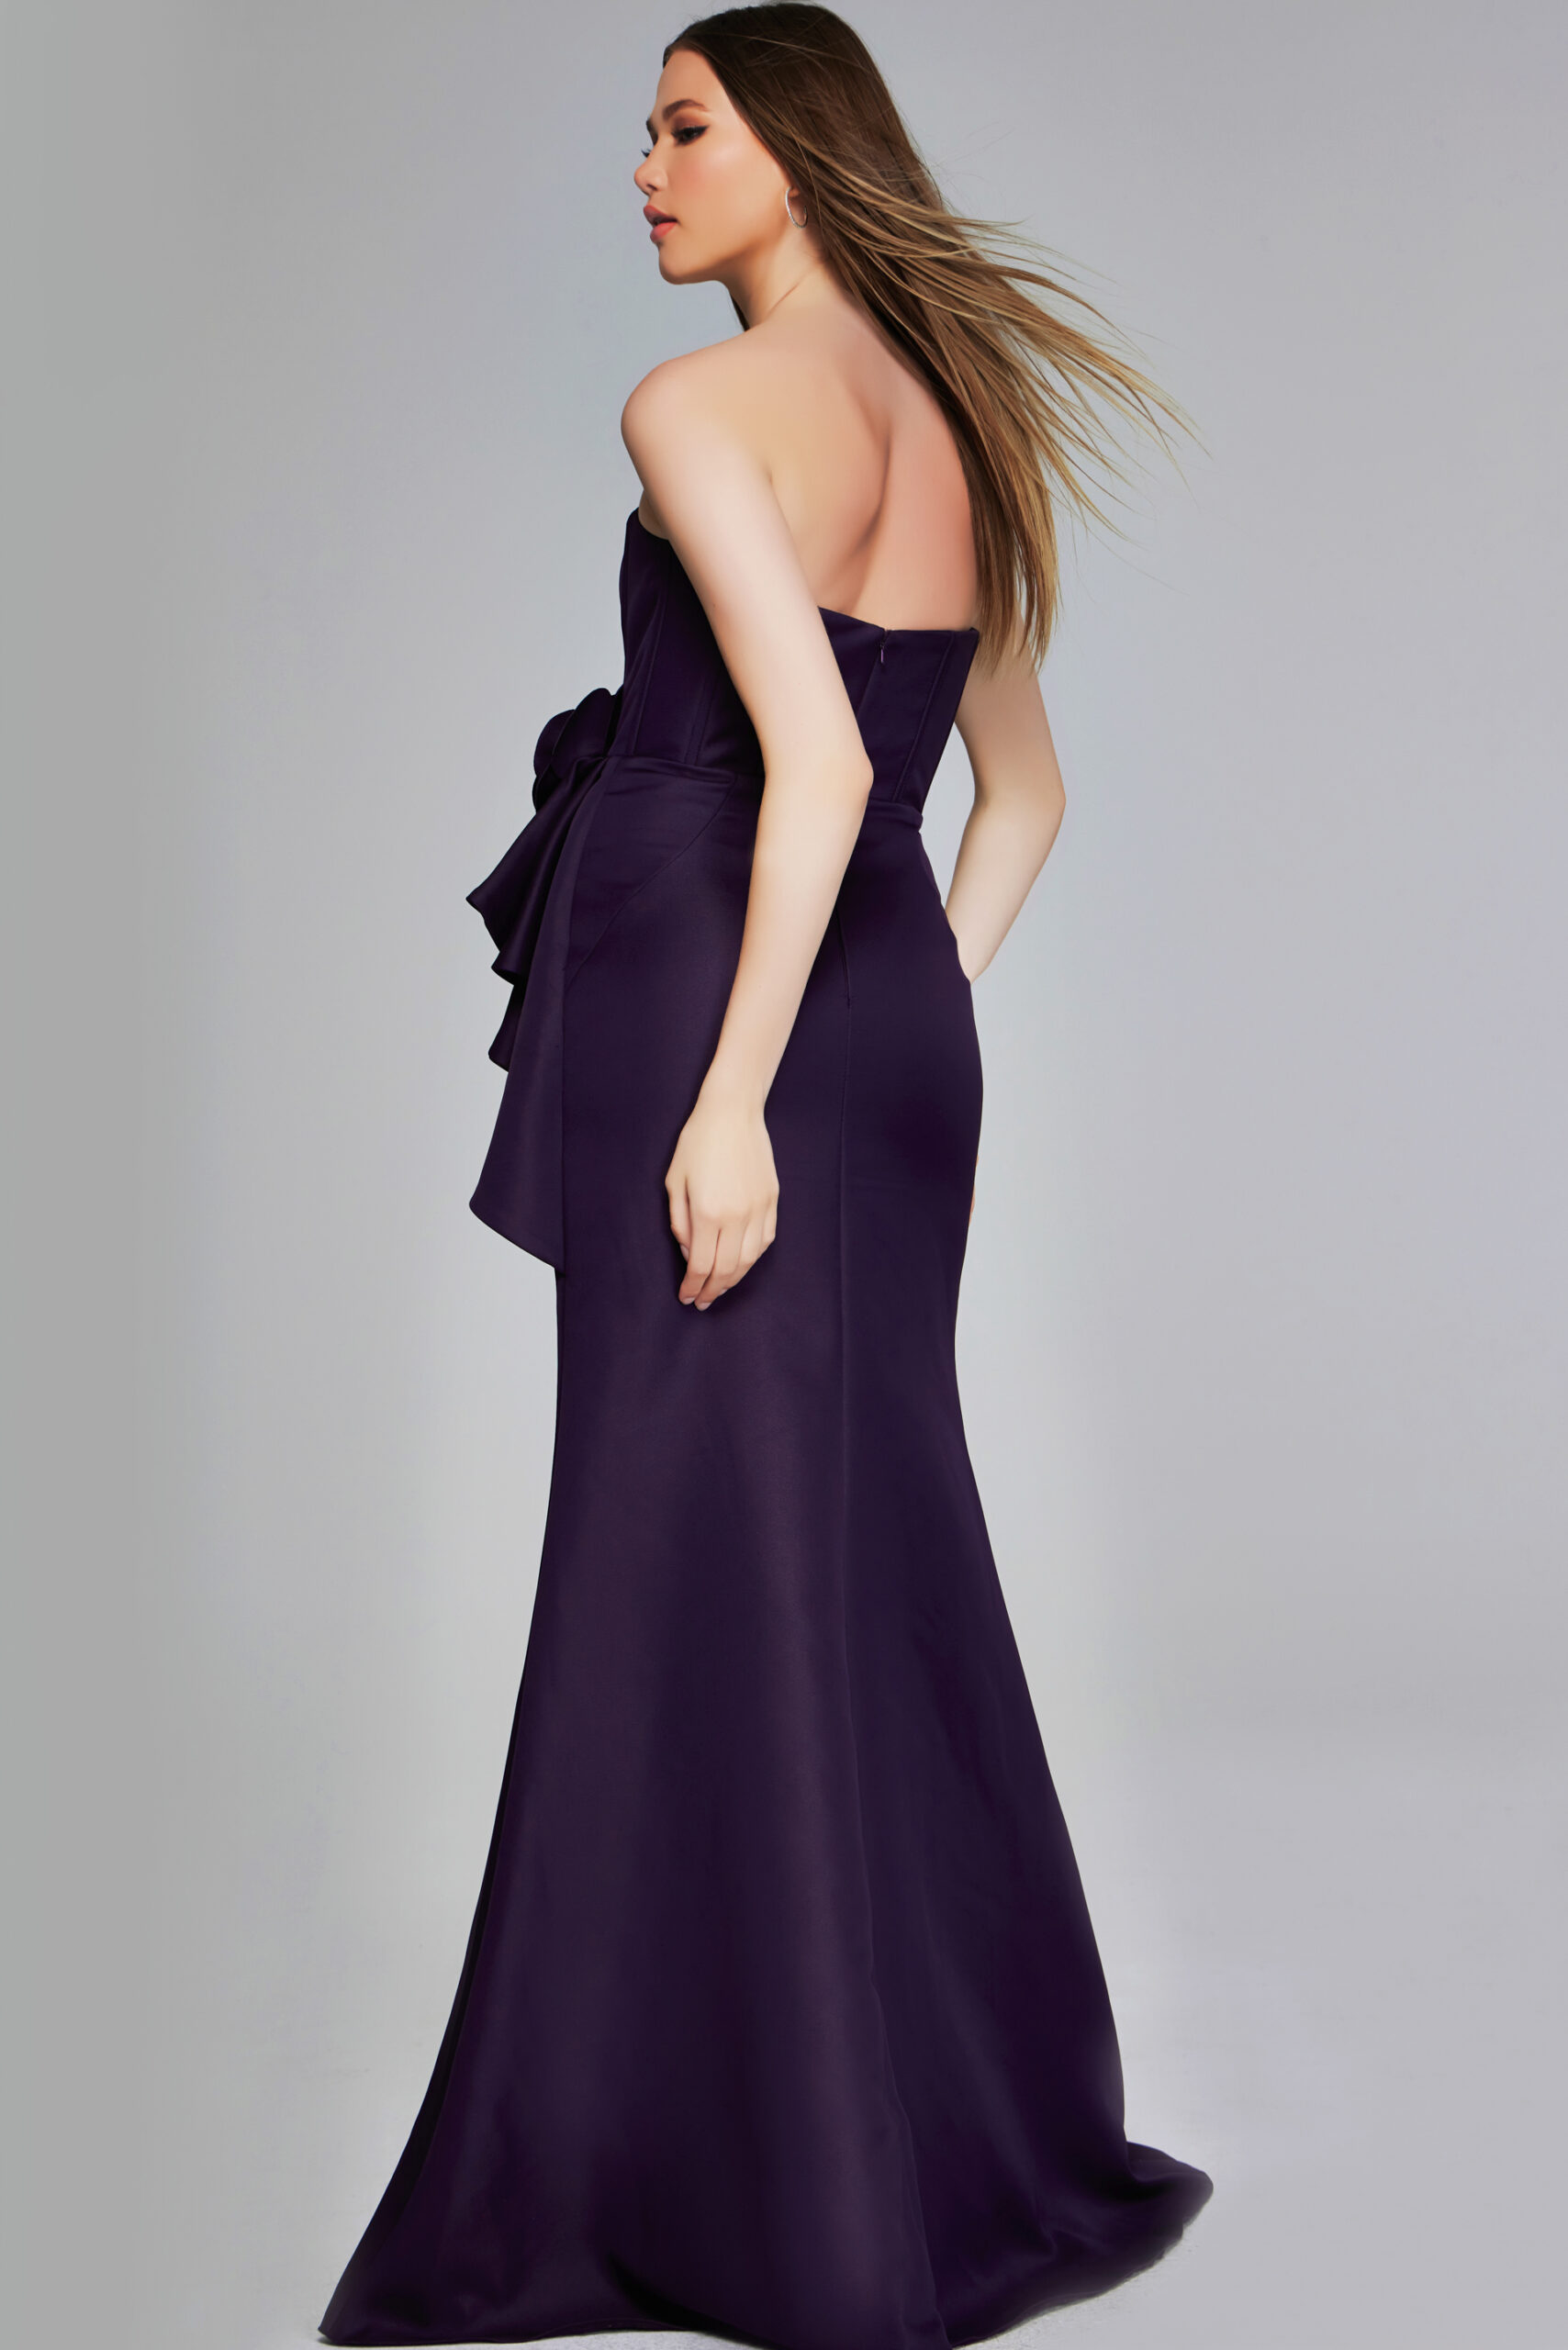 Sophisticated Eggplant Strapless Gown with High Slit and Floral Accents 40592